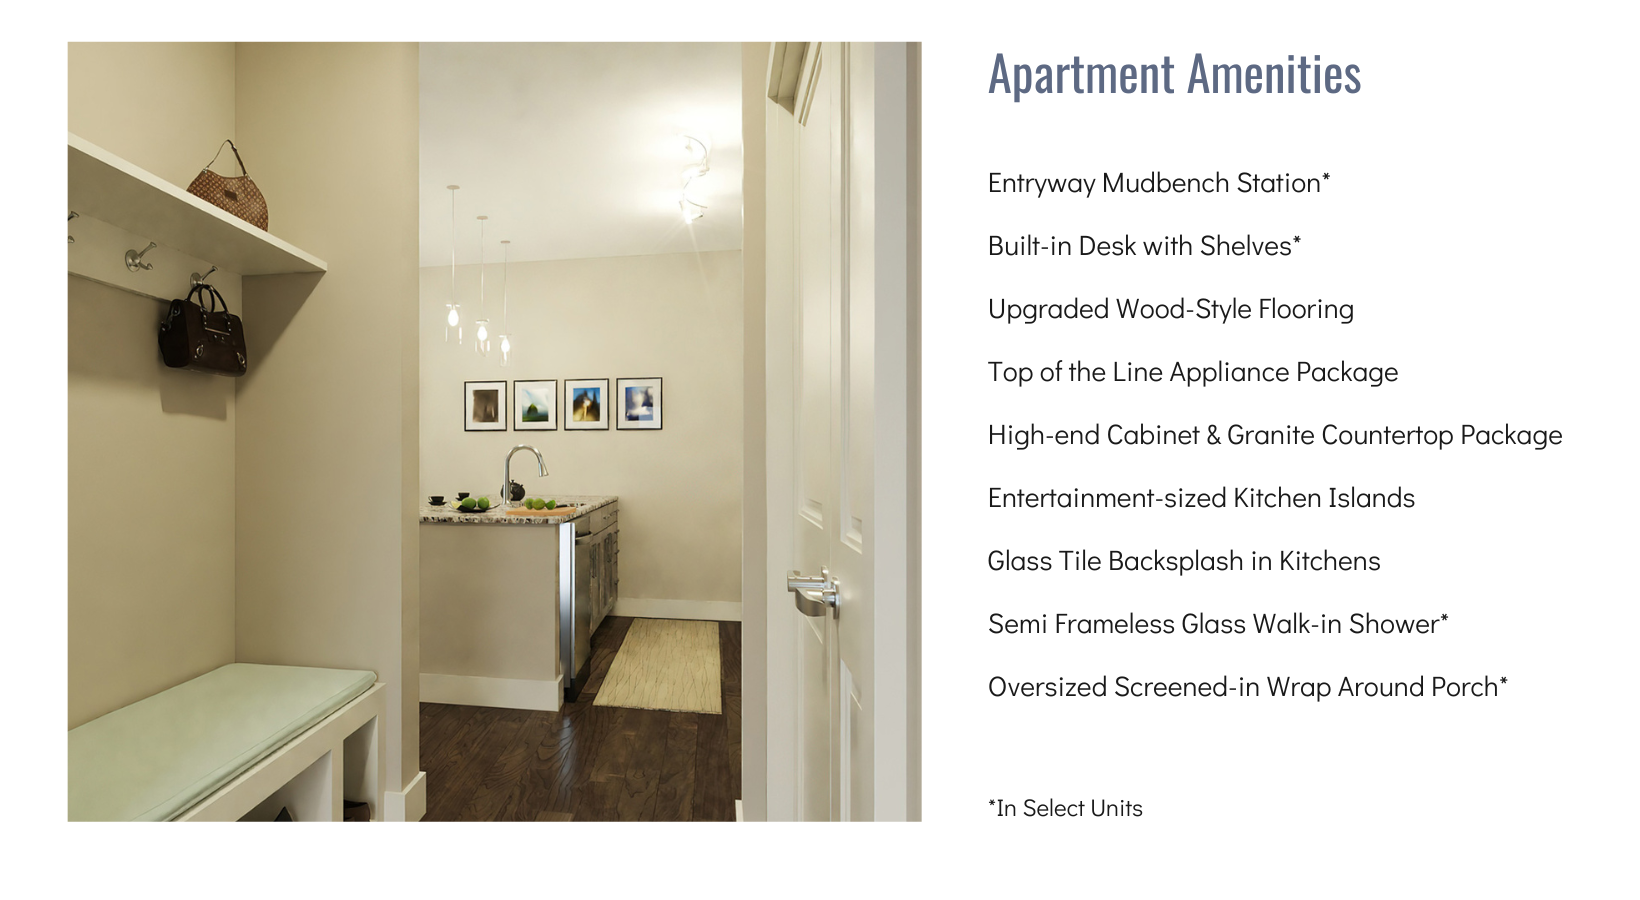 apartment amenity list and image of entryway with mud bench and view of kitchen